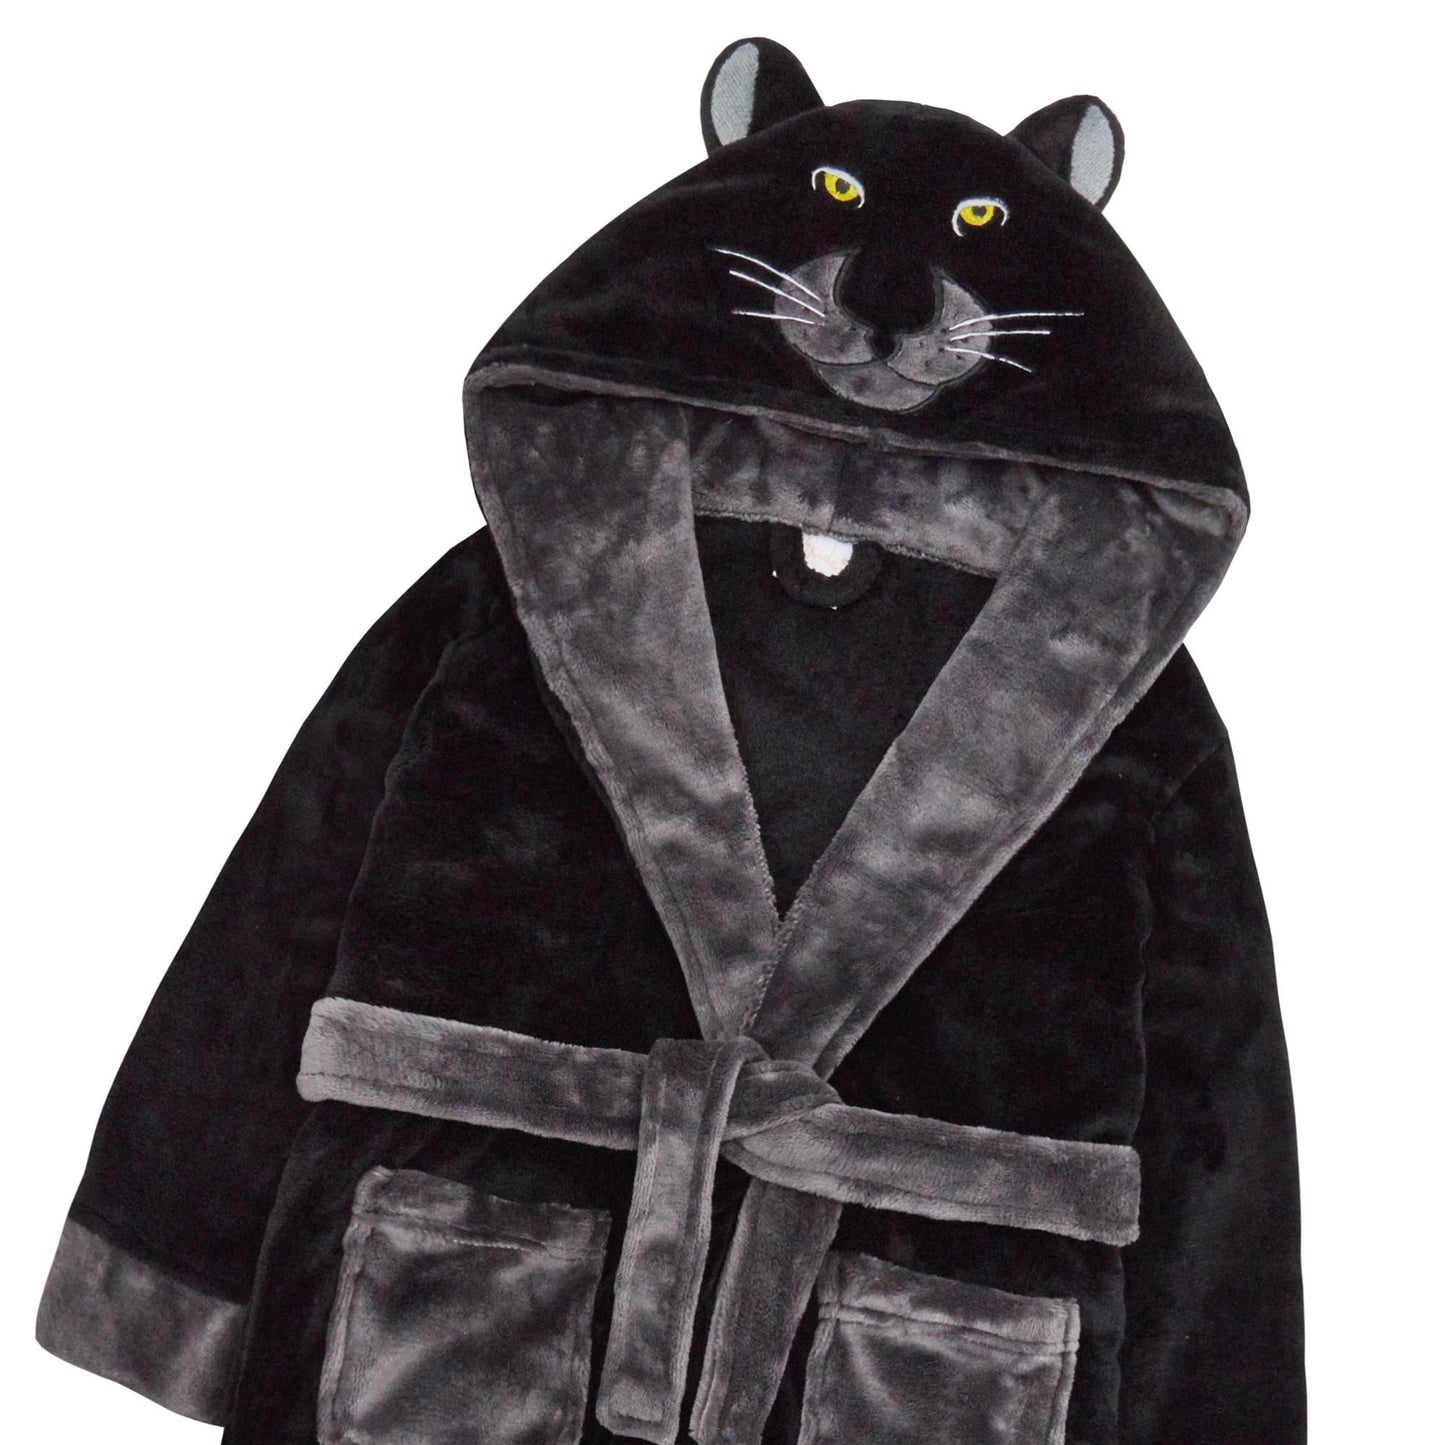 Childrens Panther Hood Plush Fleece Dressing Gown ~ 7-13 years